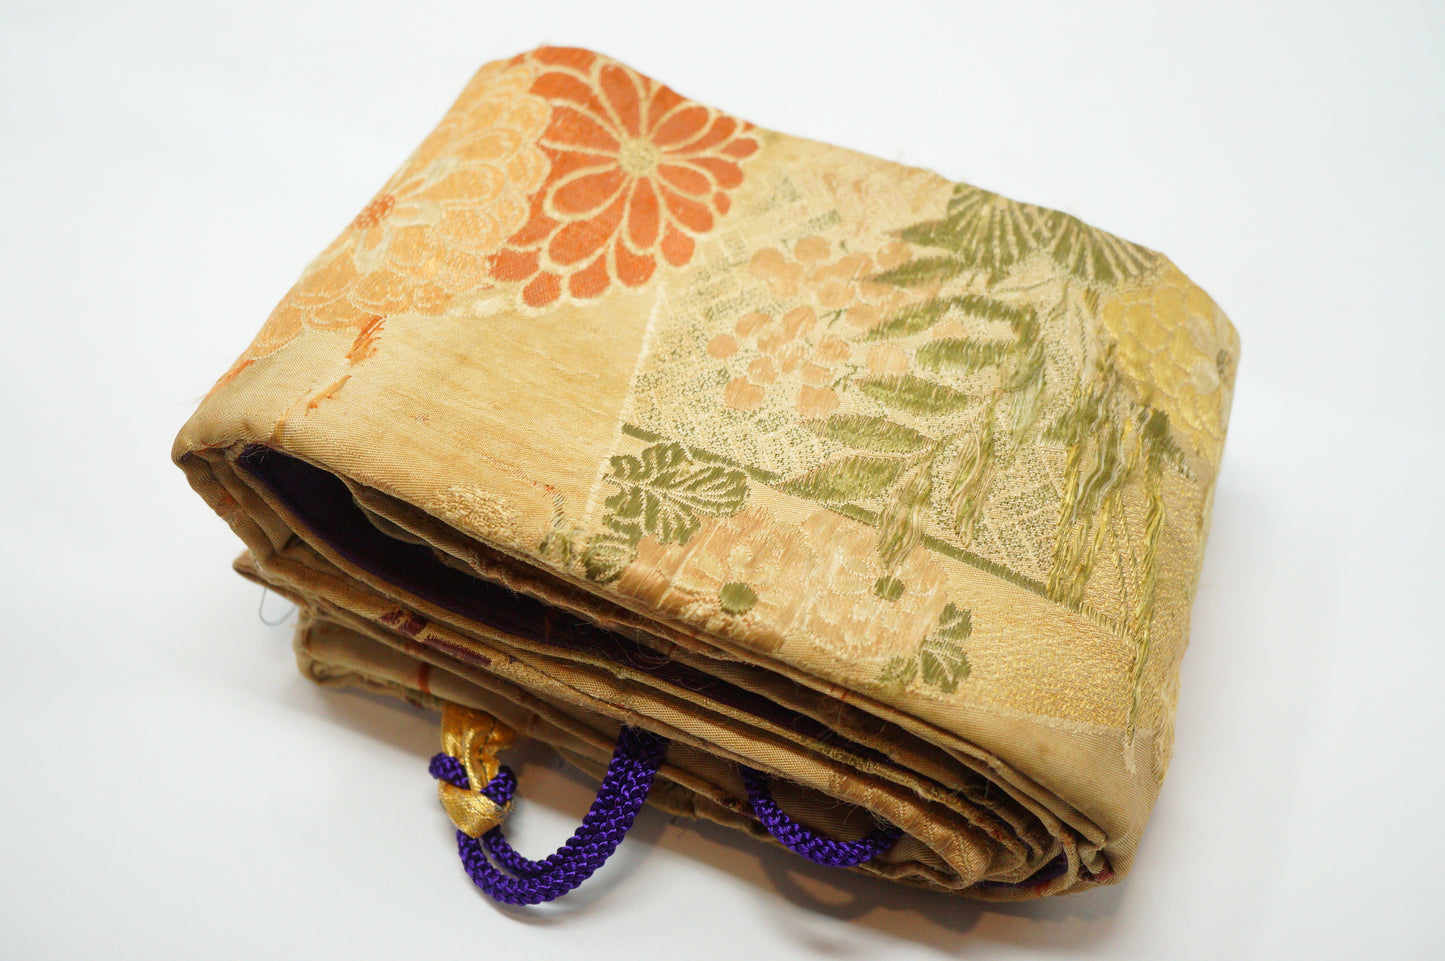 Japanese Vintage Weapon Bag made of Kimono Fabric from Japan 0110E4